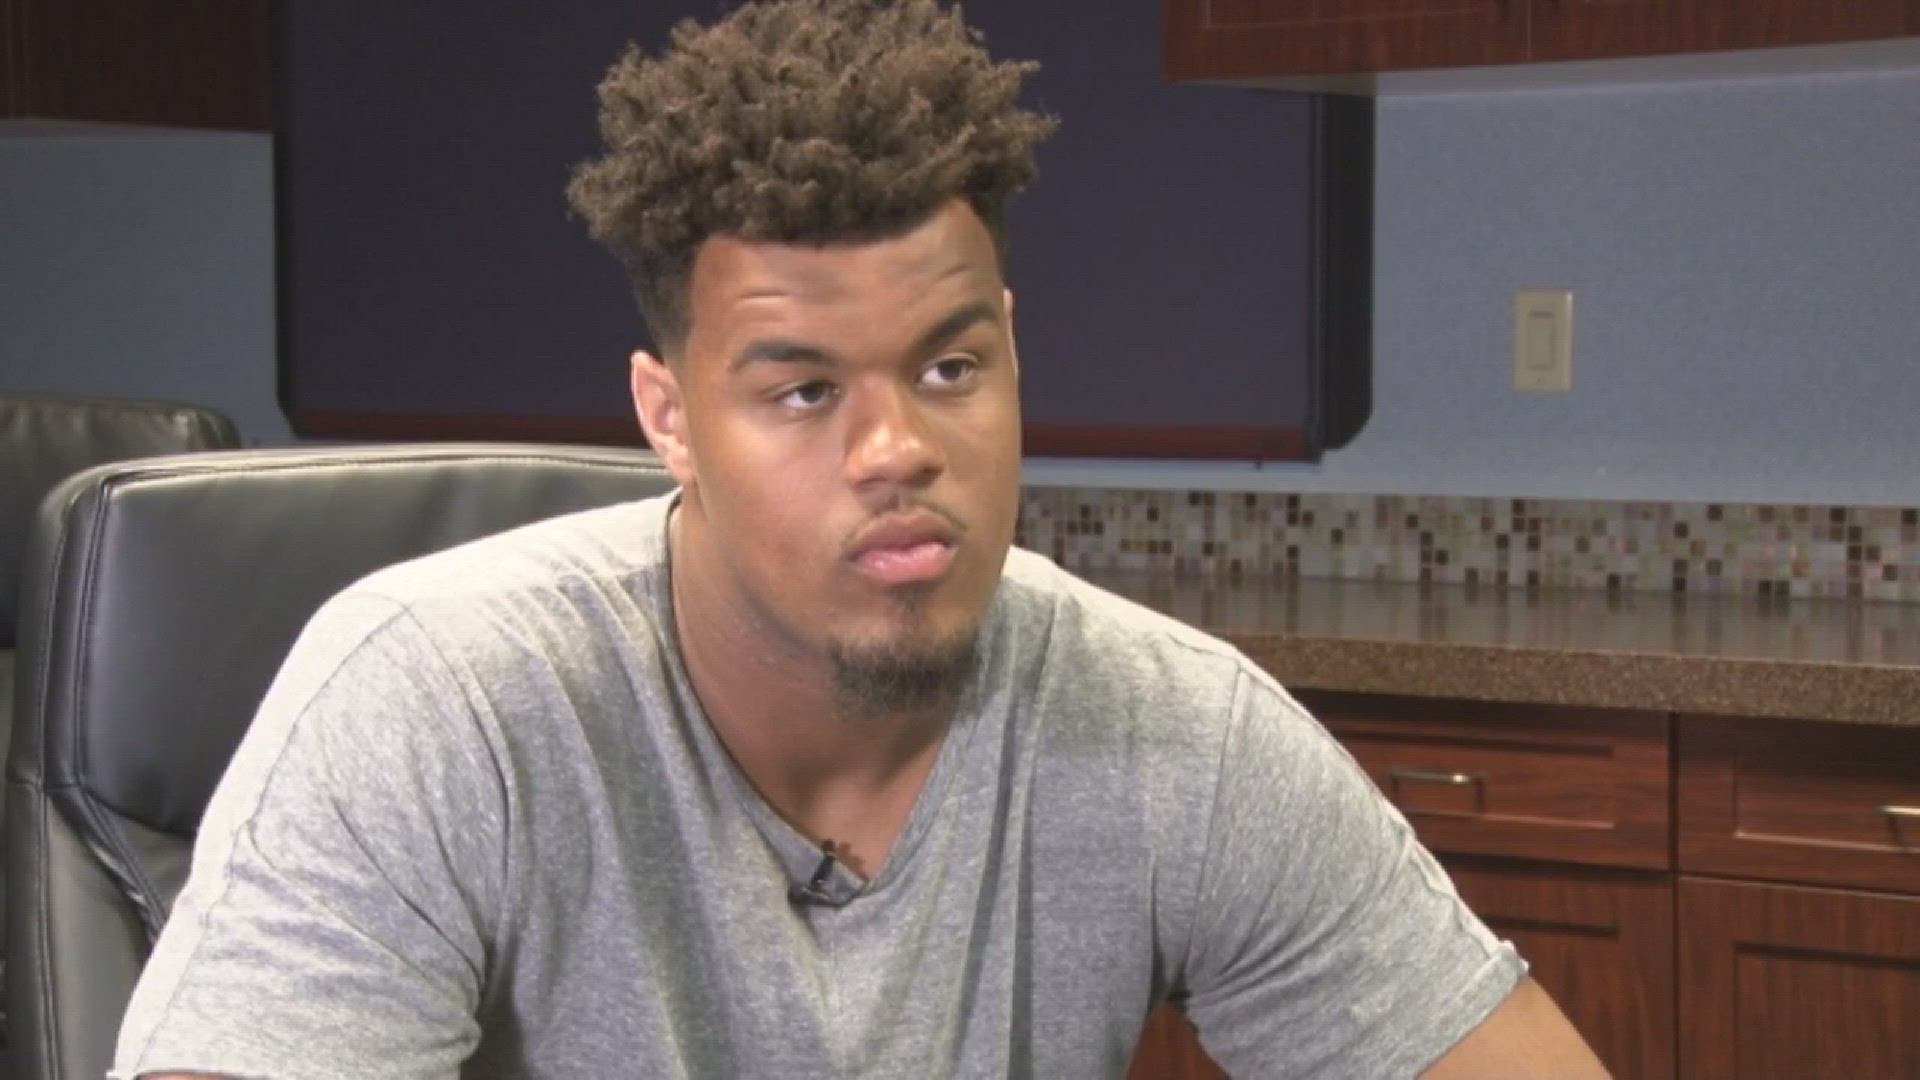 San Francisco 49ers defensive end Arik Armstead sits down with ABC10's Sean Cunningham and Pierre Noujaim to discuss bringing his first youth football camp to his hometown of Elk Grove and talks about the changes with his team heading into training camp.